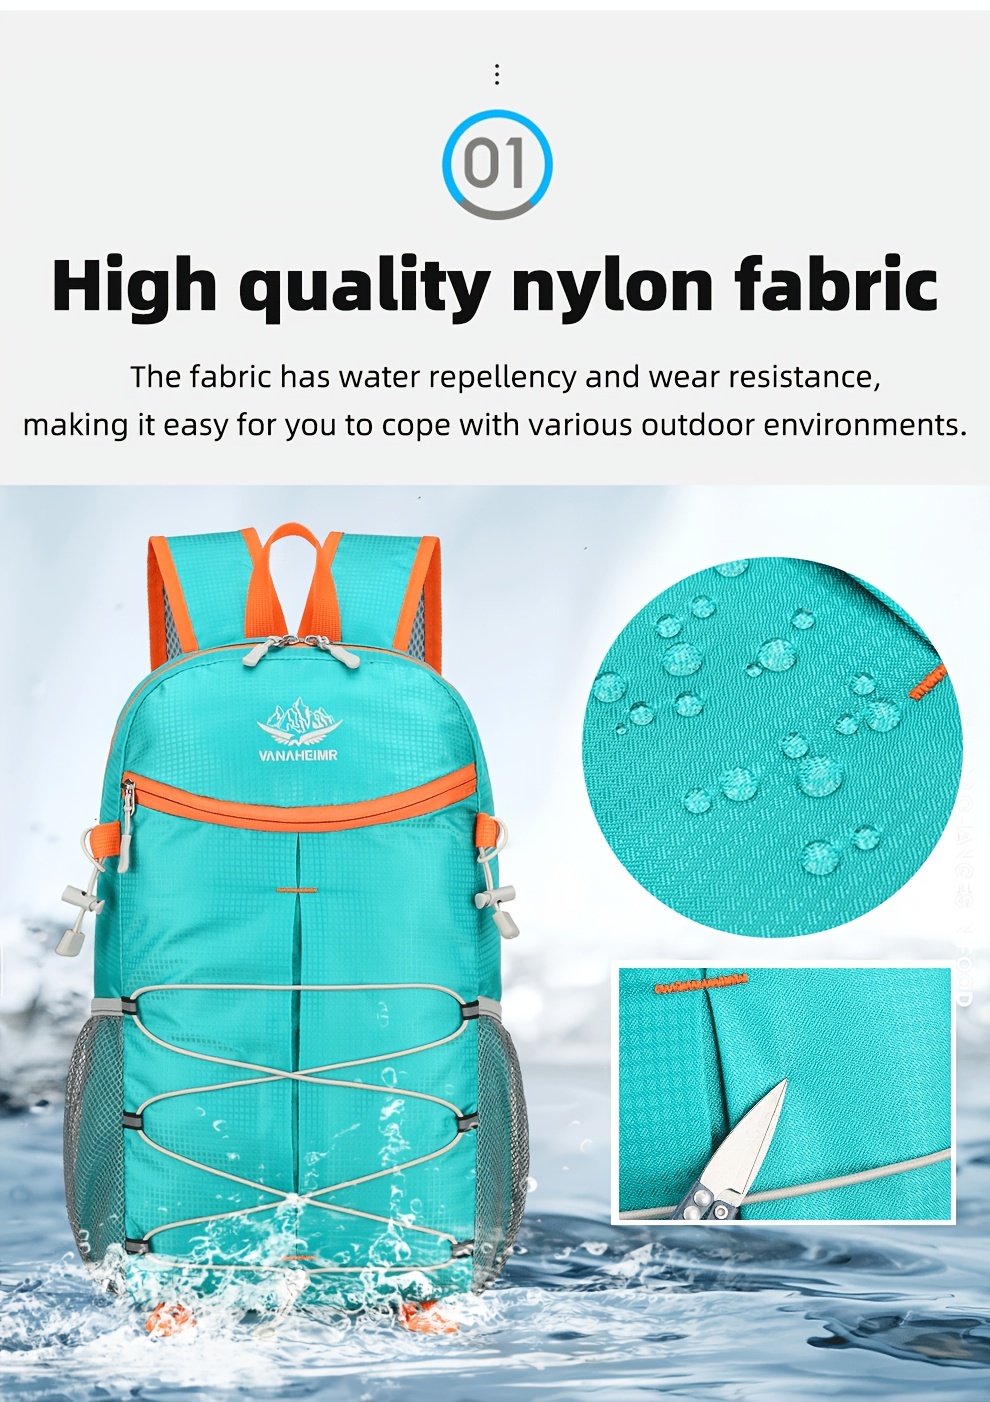 Breathable Foldable Fishing Backpack Large Capacity For Outdoor Activities,  Hiking, Riding, And Biking Unisex Back Pack Sport From Yuanmu23, $32.51